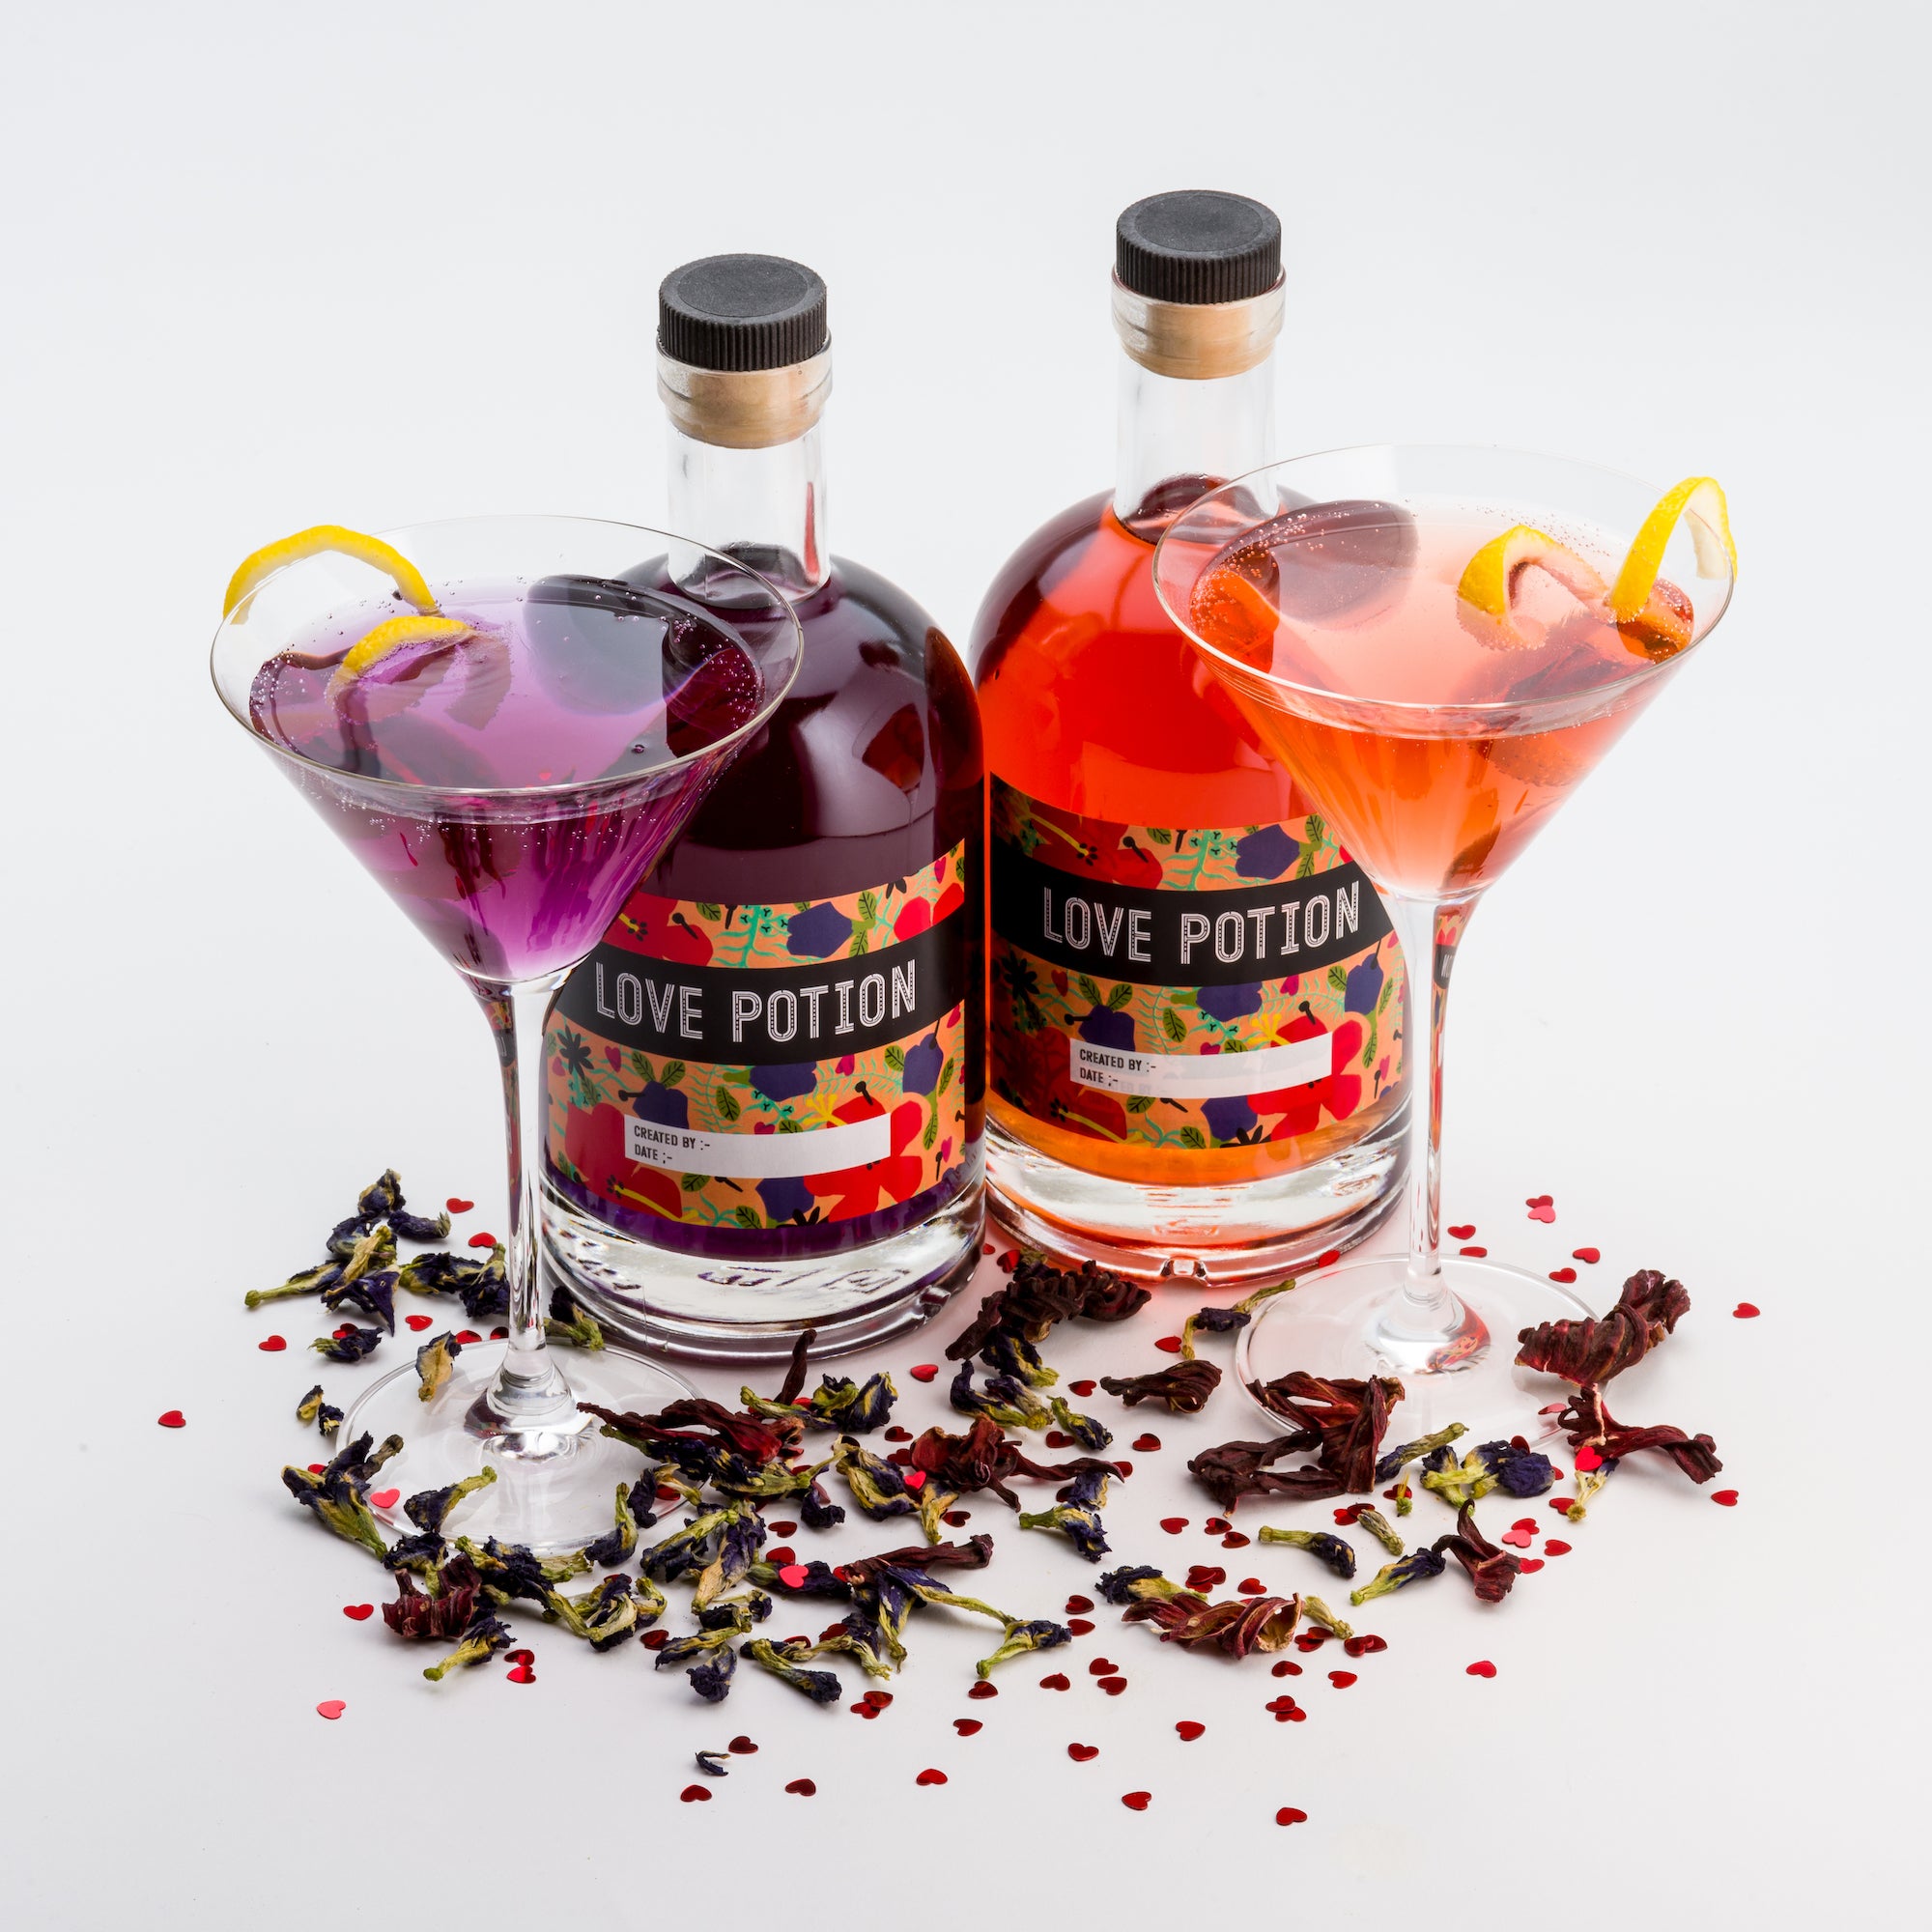 Gin Etc. Gin Maker's Kit - The Love Potion Create you own Blended Gin